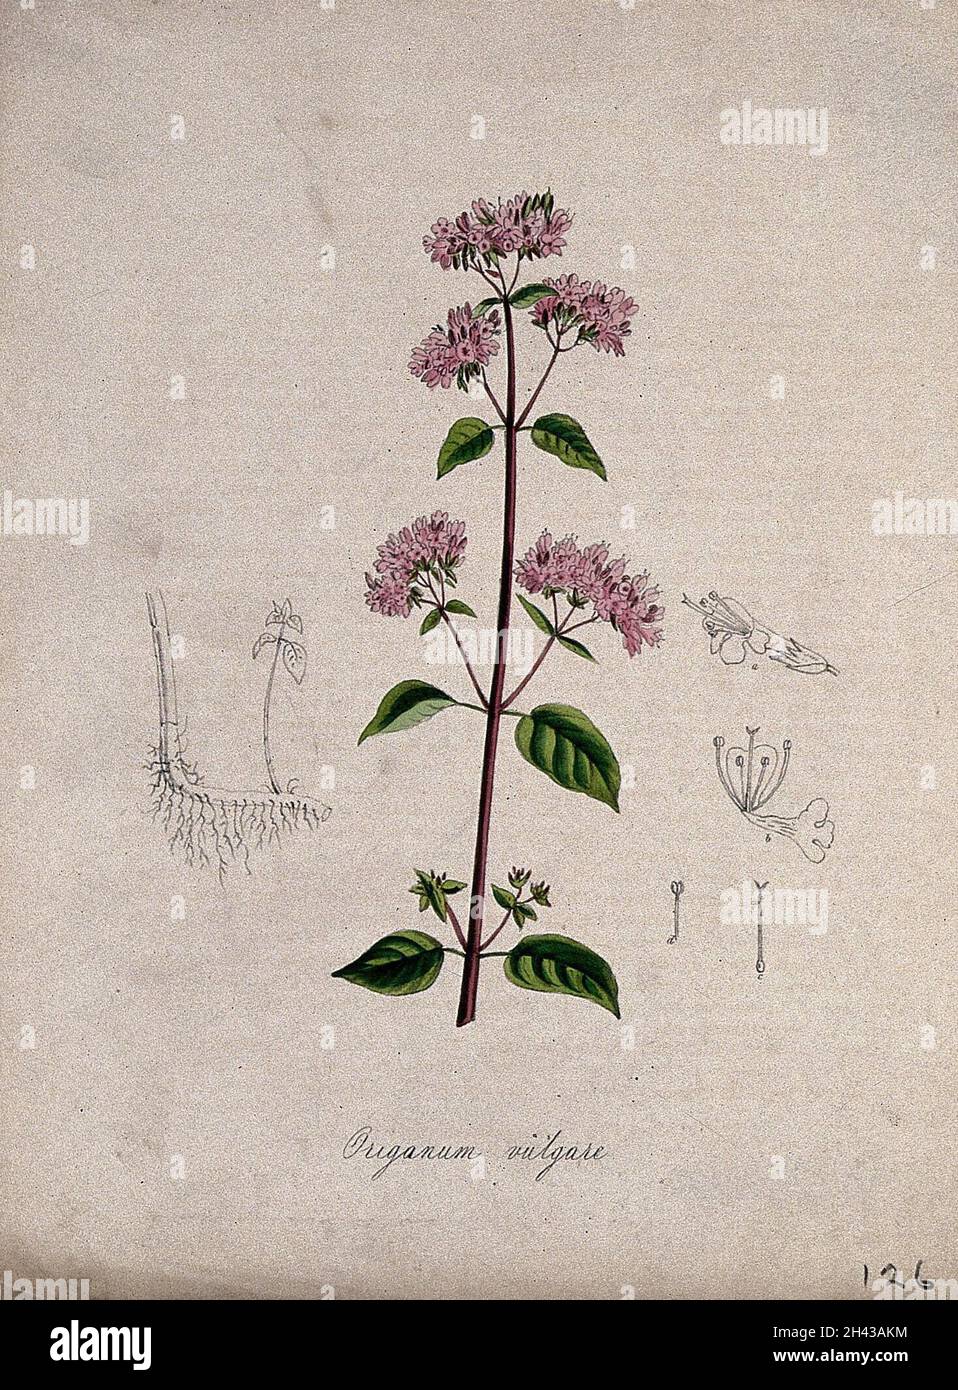 Marjoram (Origanum vulgare): flowering stem, rootstock and floral segments. Coloured lithograph after M. A. Burnett, c. 1847. Stock Photo